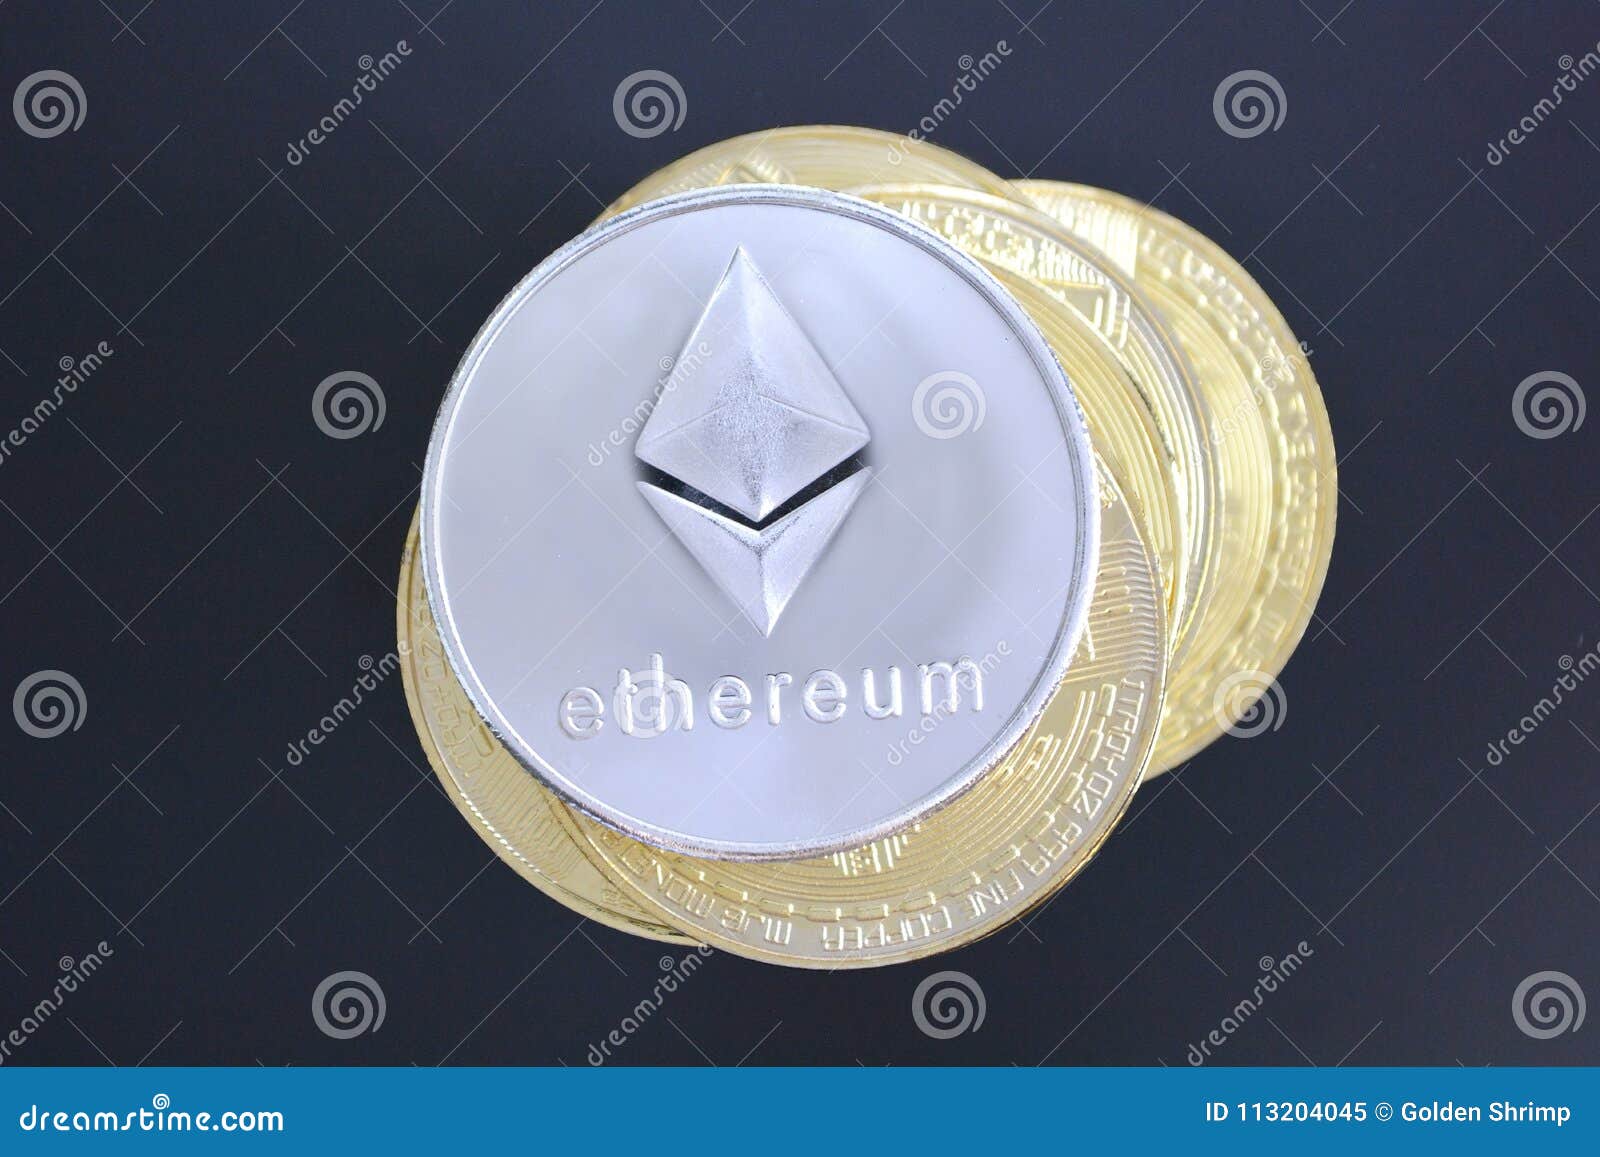 Which alt coin is similar to ethereum